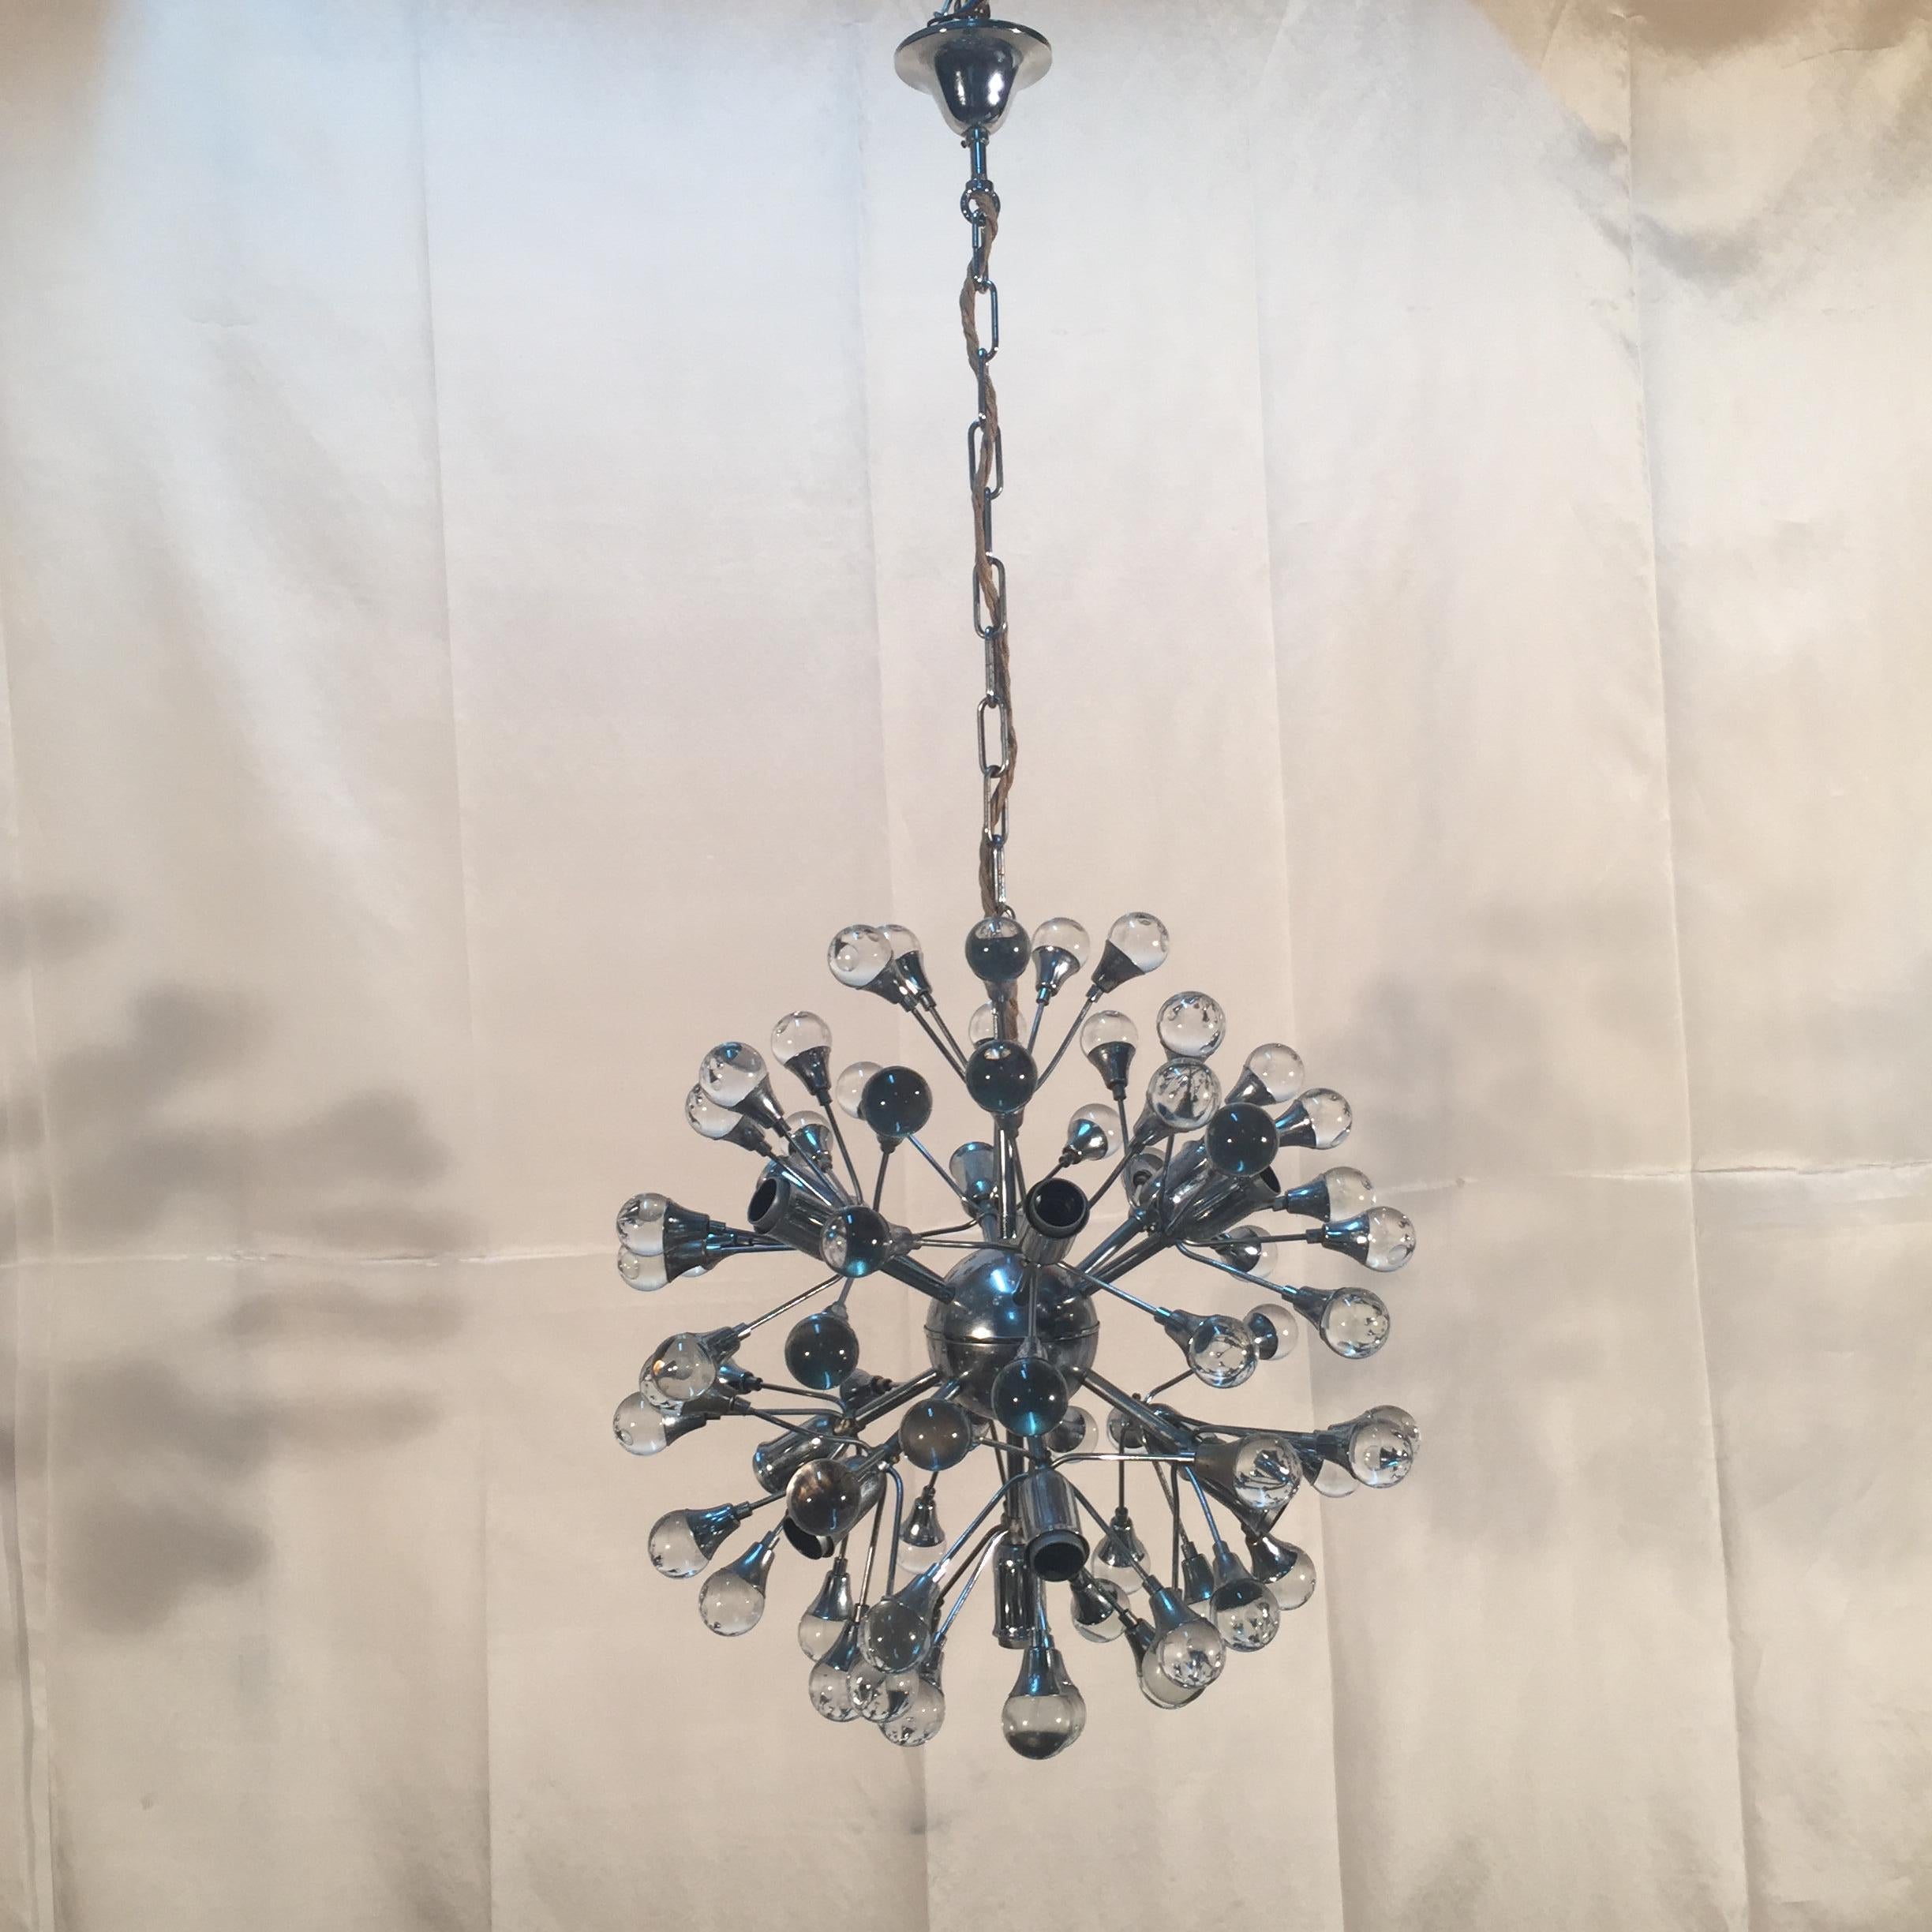 Glass and chrome chandelier produced by Gaetano Sciolari during the 1960s. It is in excellent vintage condition.